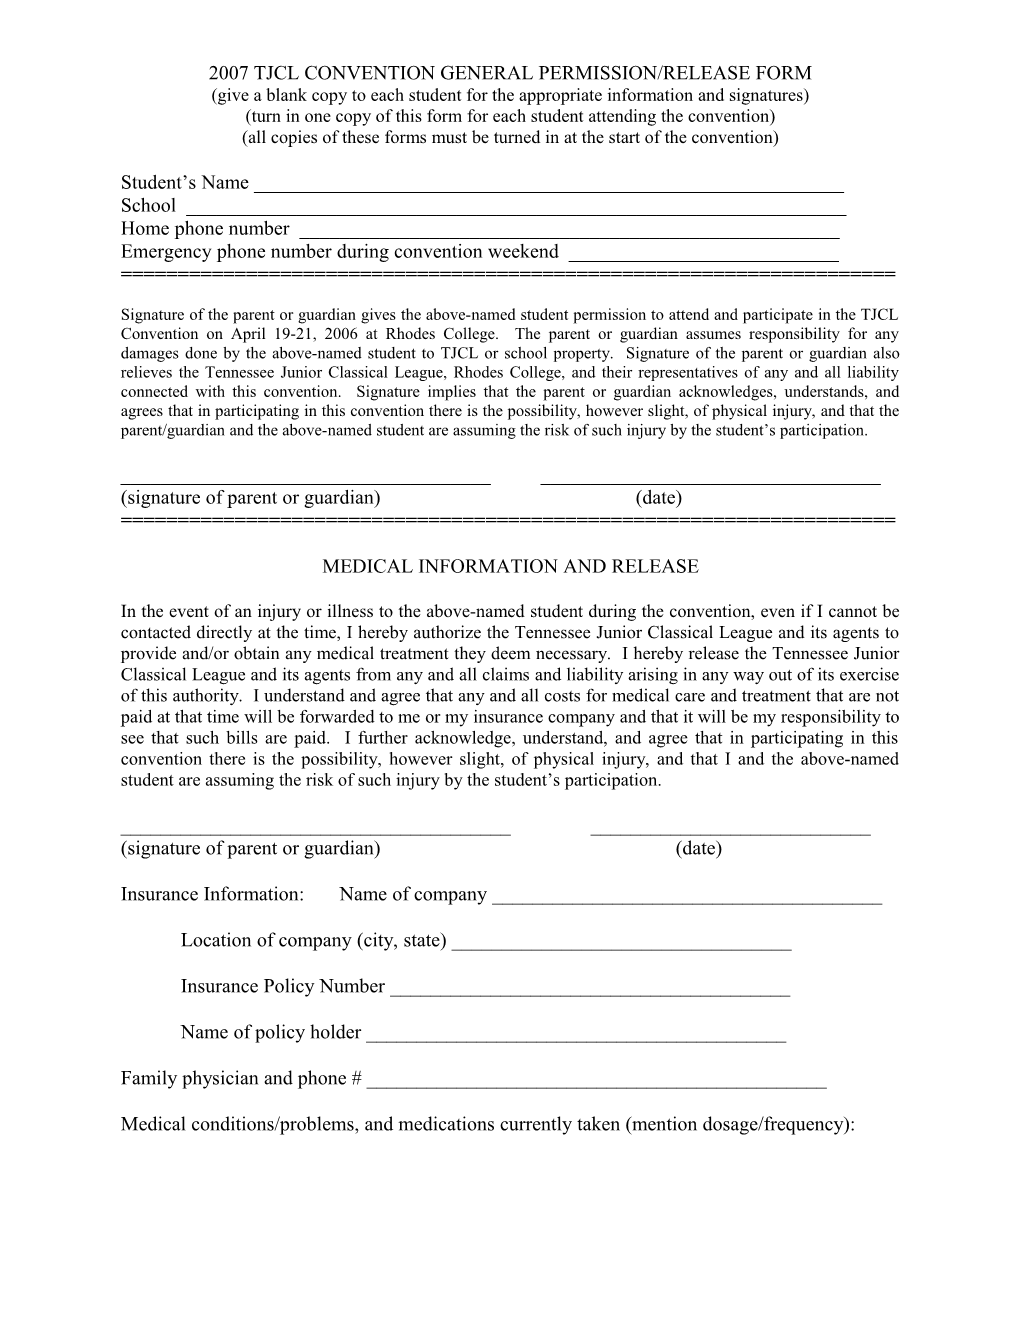 2000 Tjcl Convention Olympika Permission and Release Form